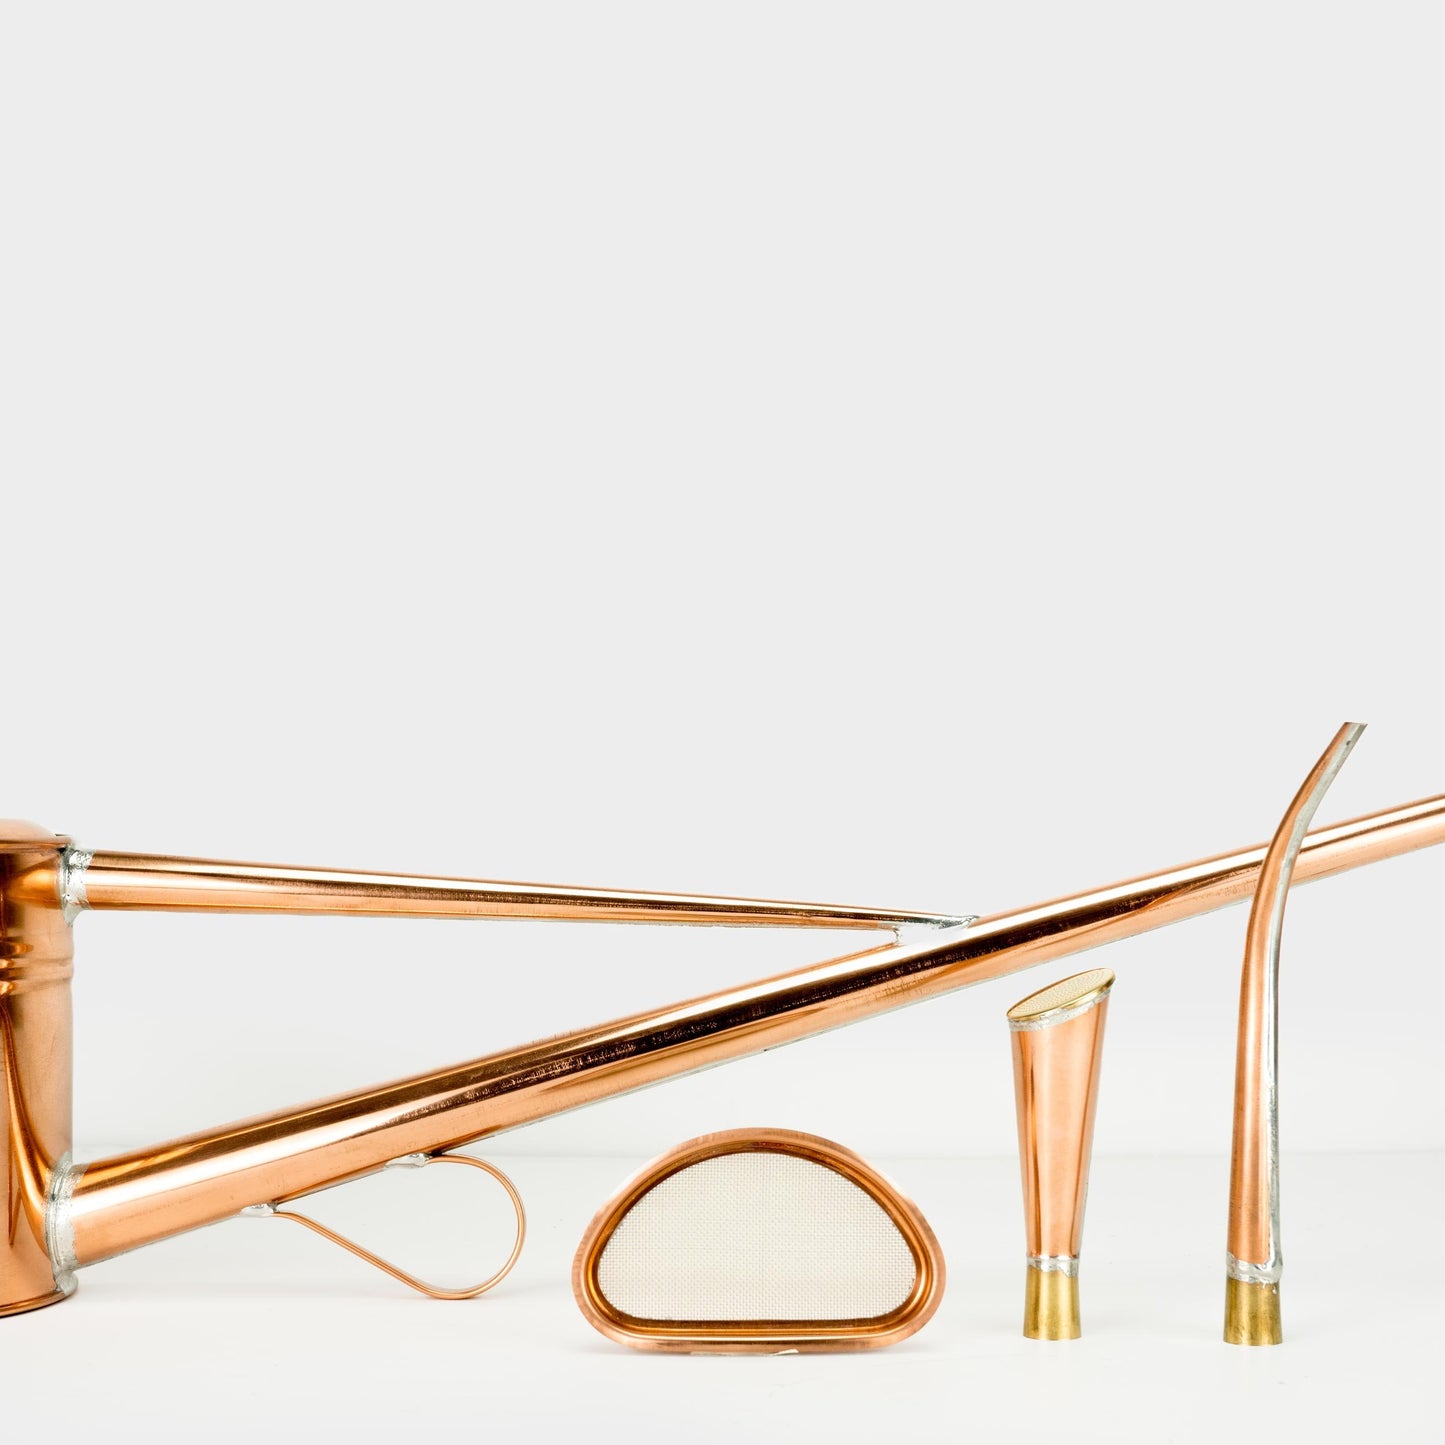 (Waitlist) LONG-NECKED BRITISH HYBRID COPPER WATERING CAN NO. 2 BY NEGISHI INDUSTRY CO.